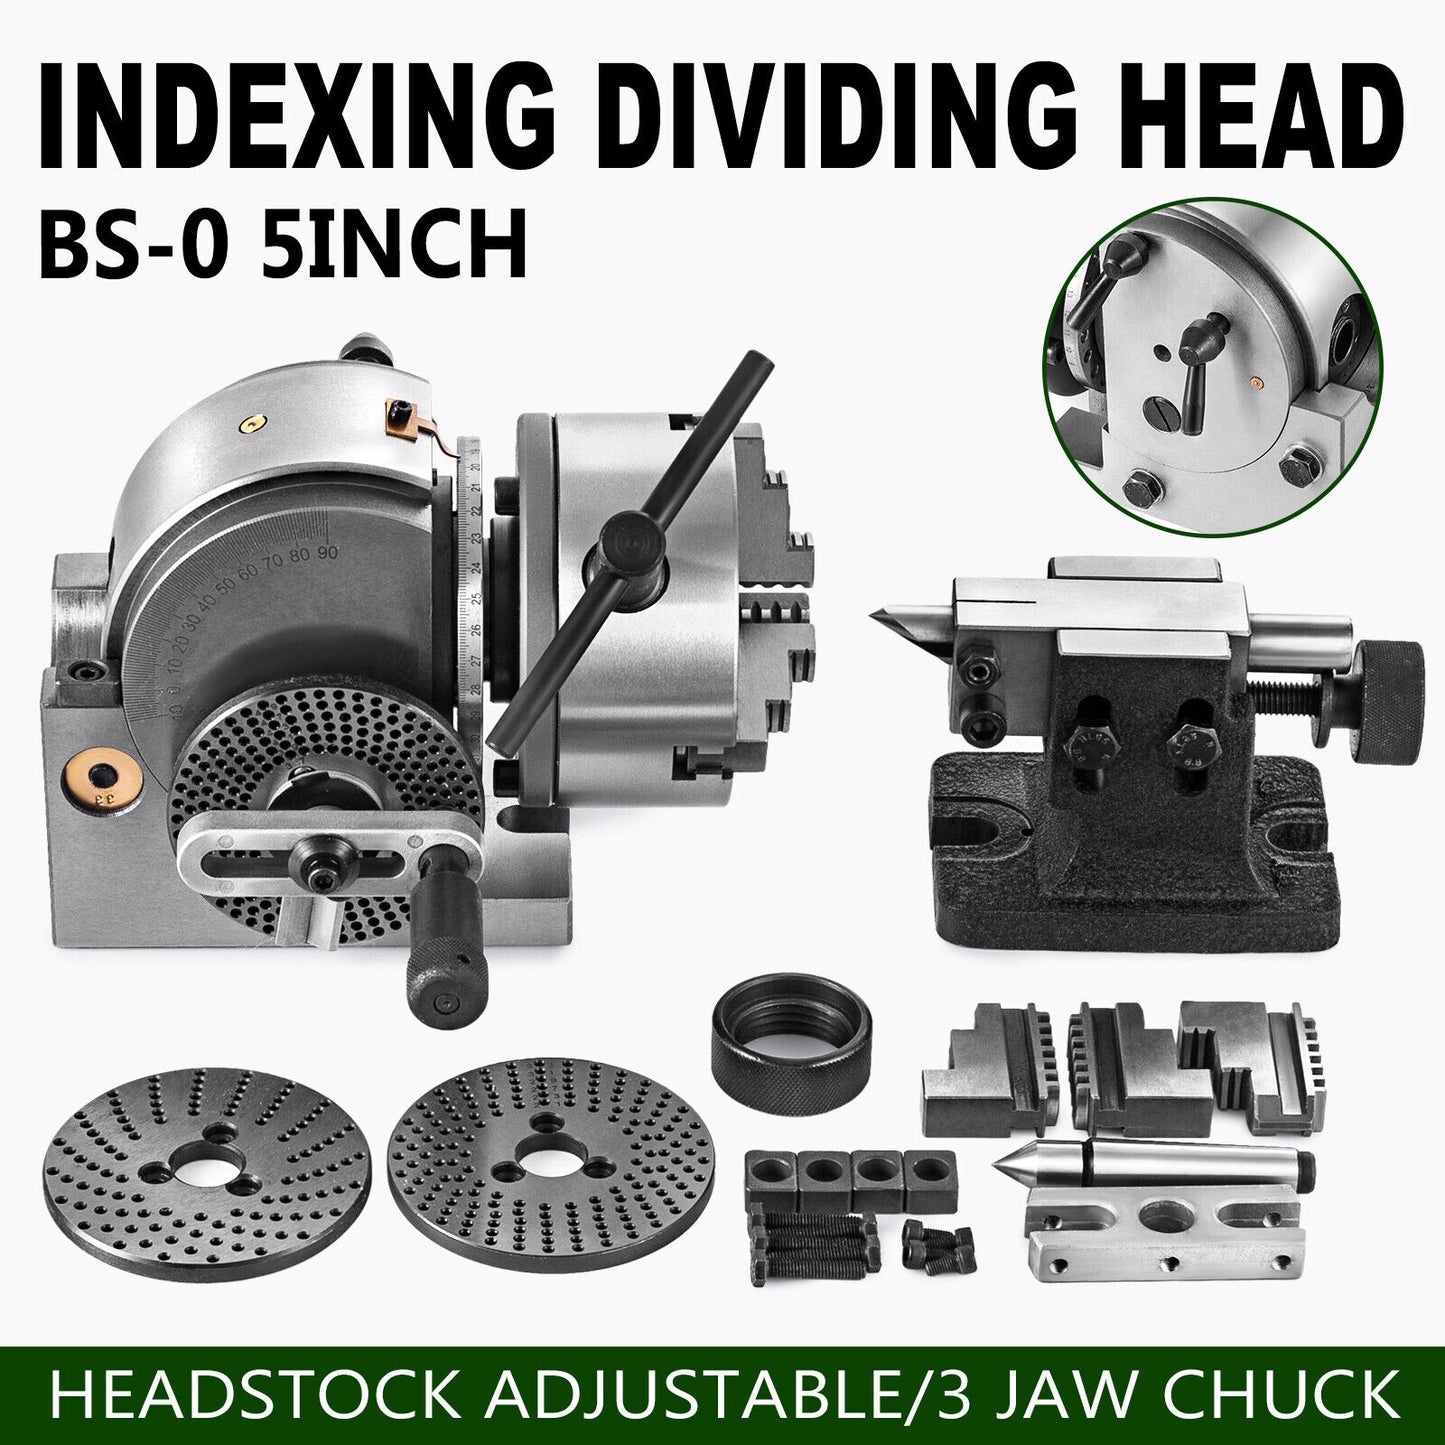 New Dividing Head BS-0 5" 3 Jaw Chuck Dividing Head Set for Milling Machine